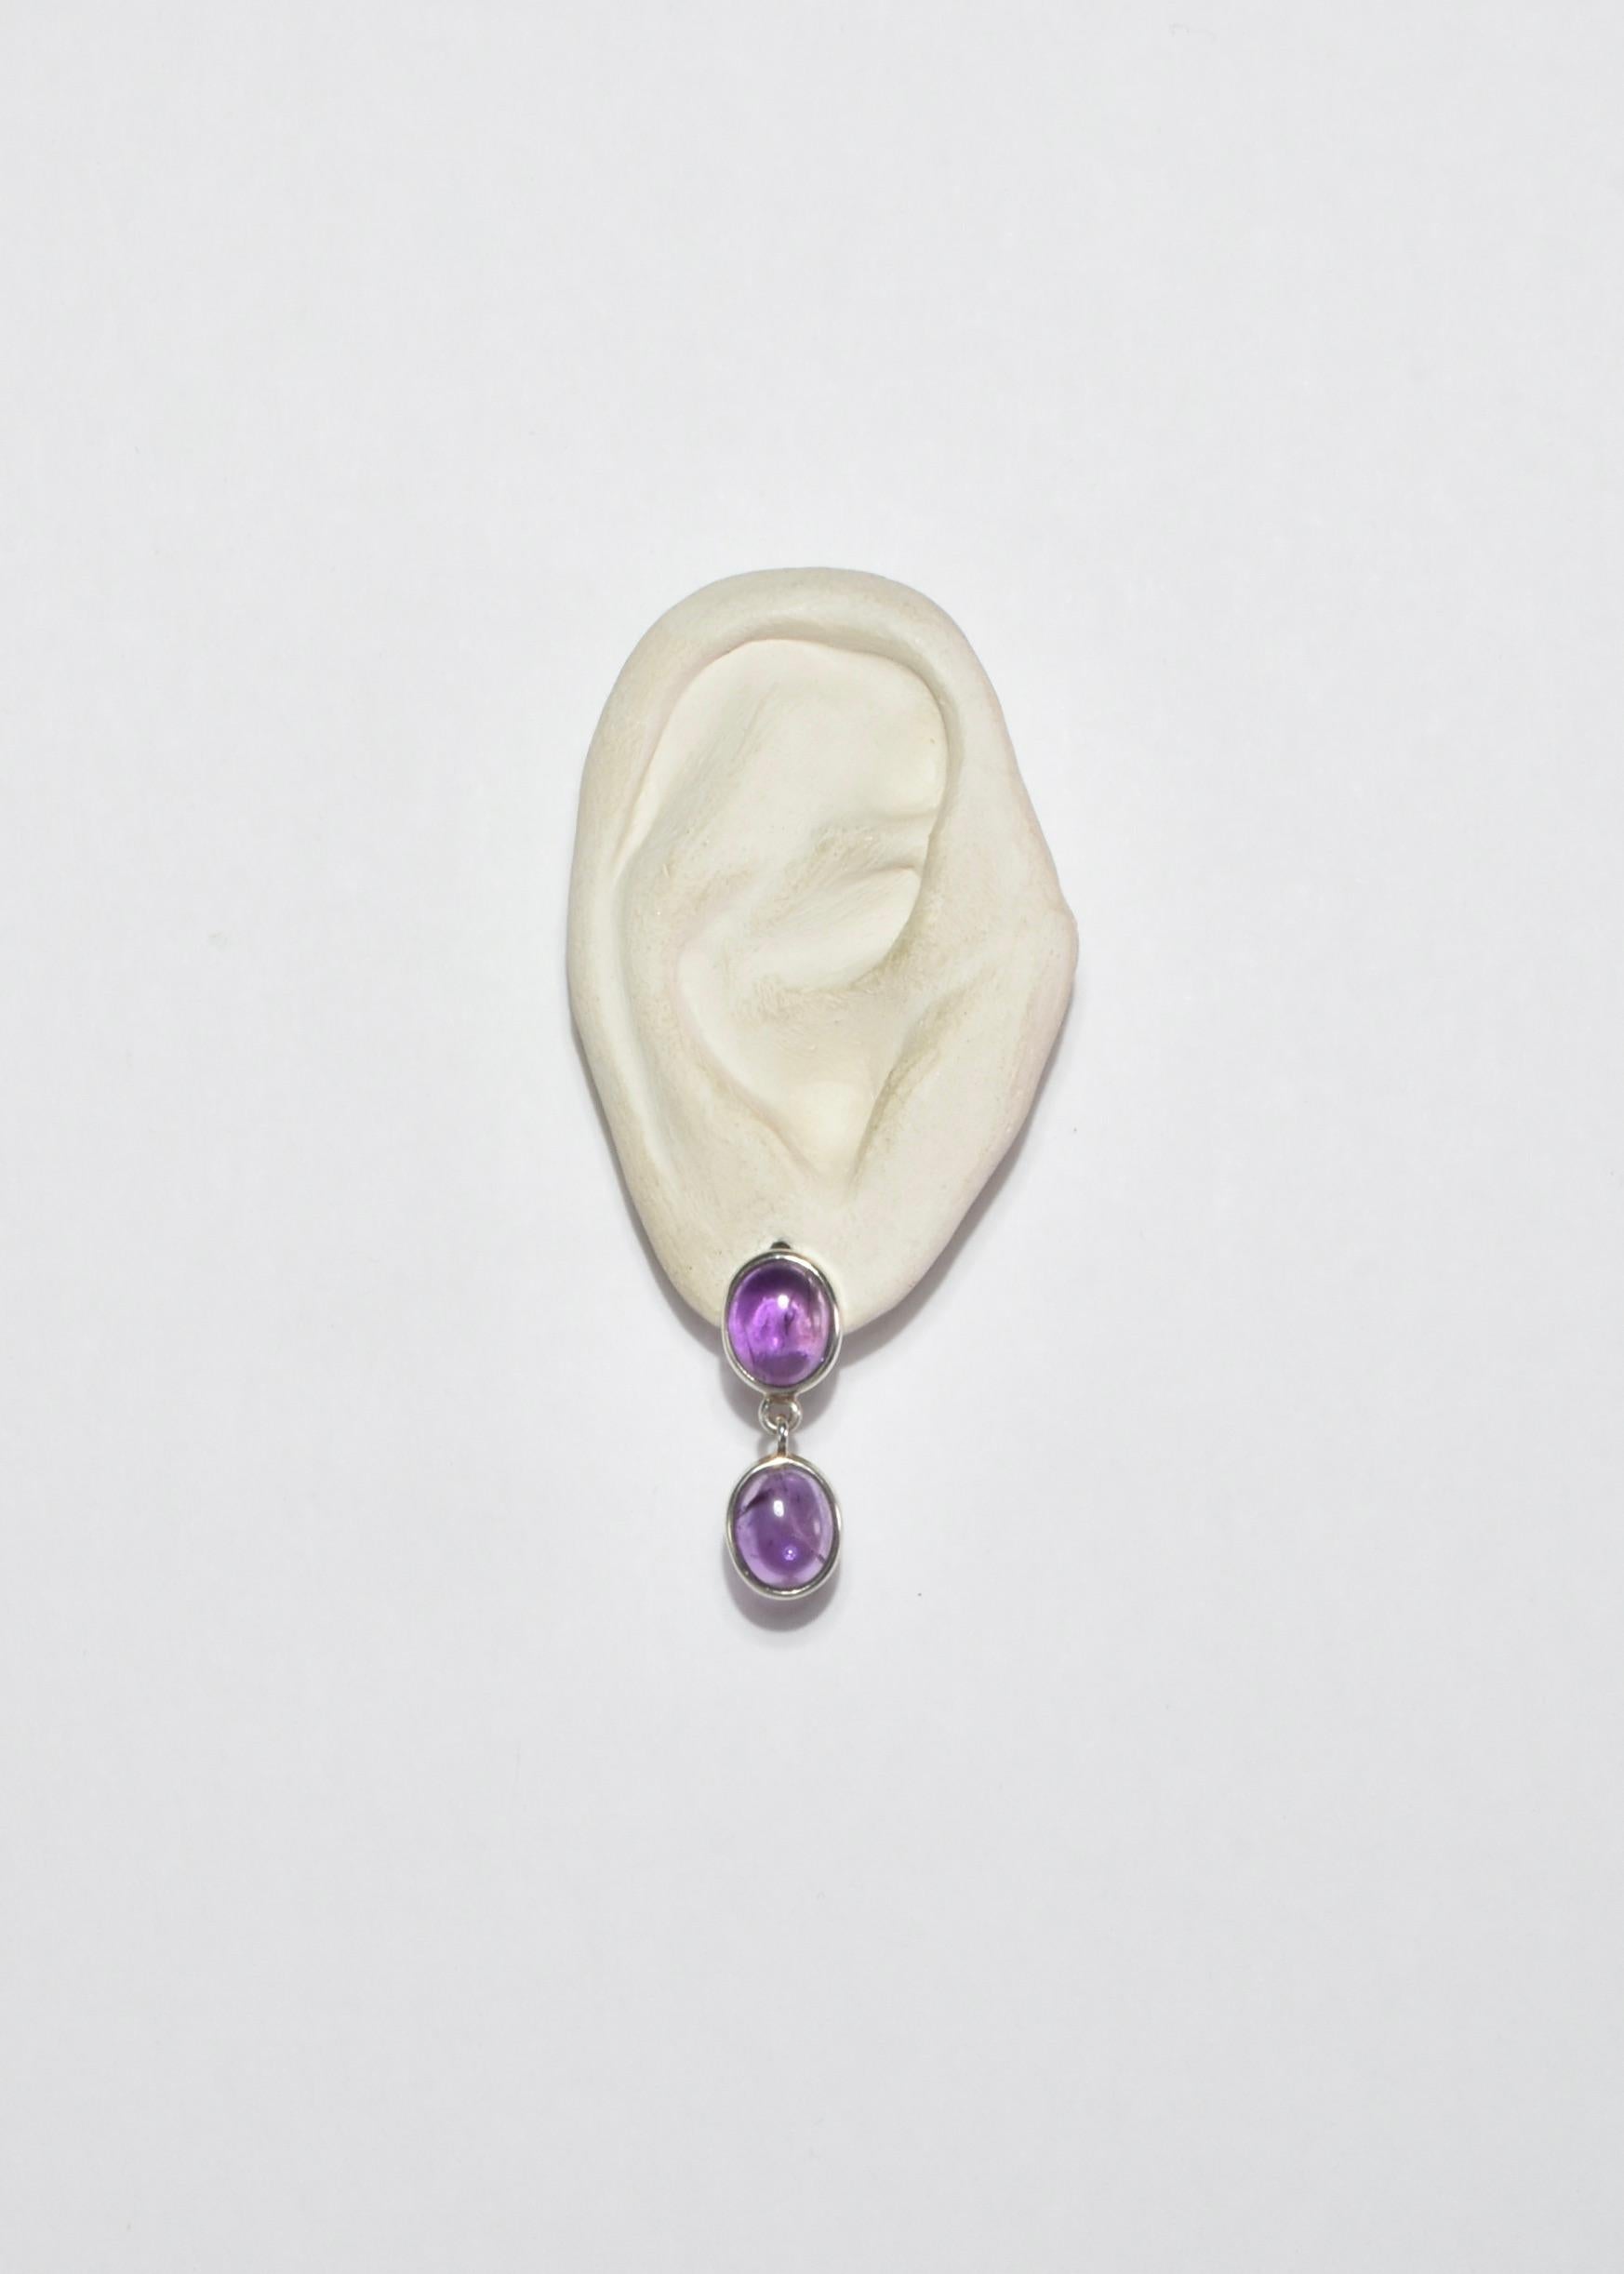 Silver Amethyst Earrings In Good Condition For Sale In Richmond, VA